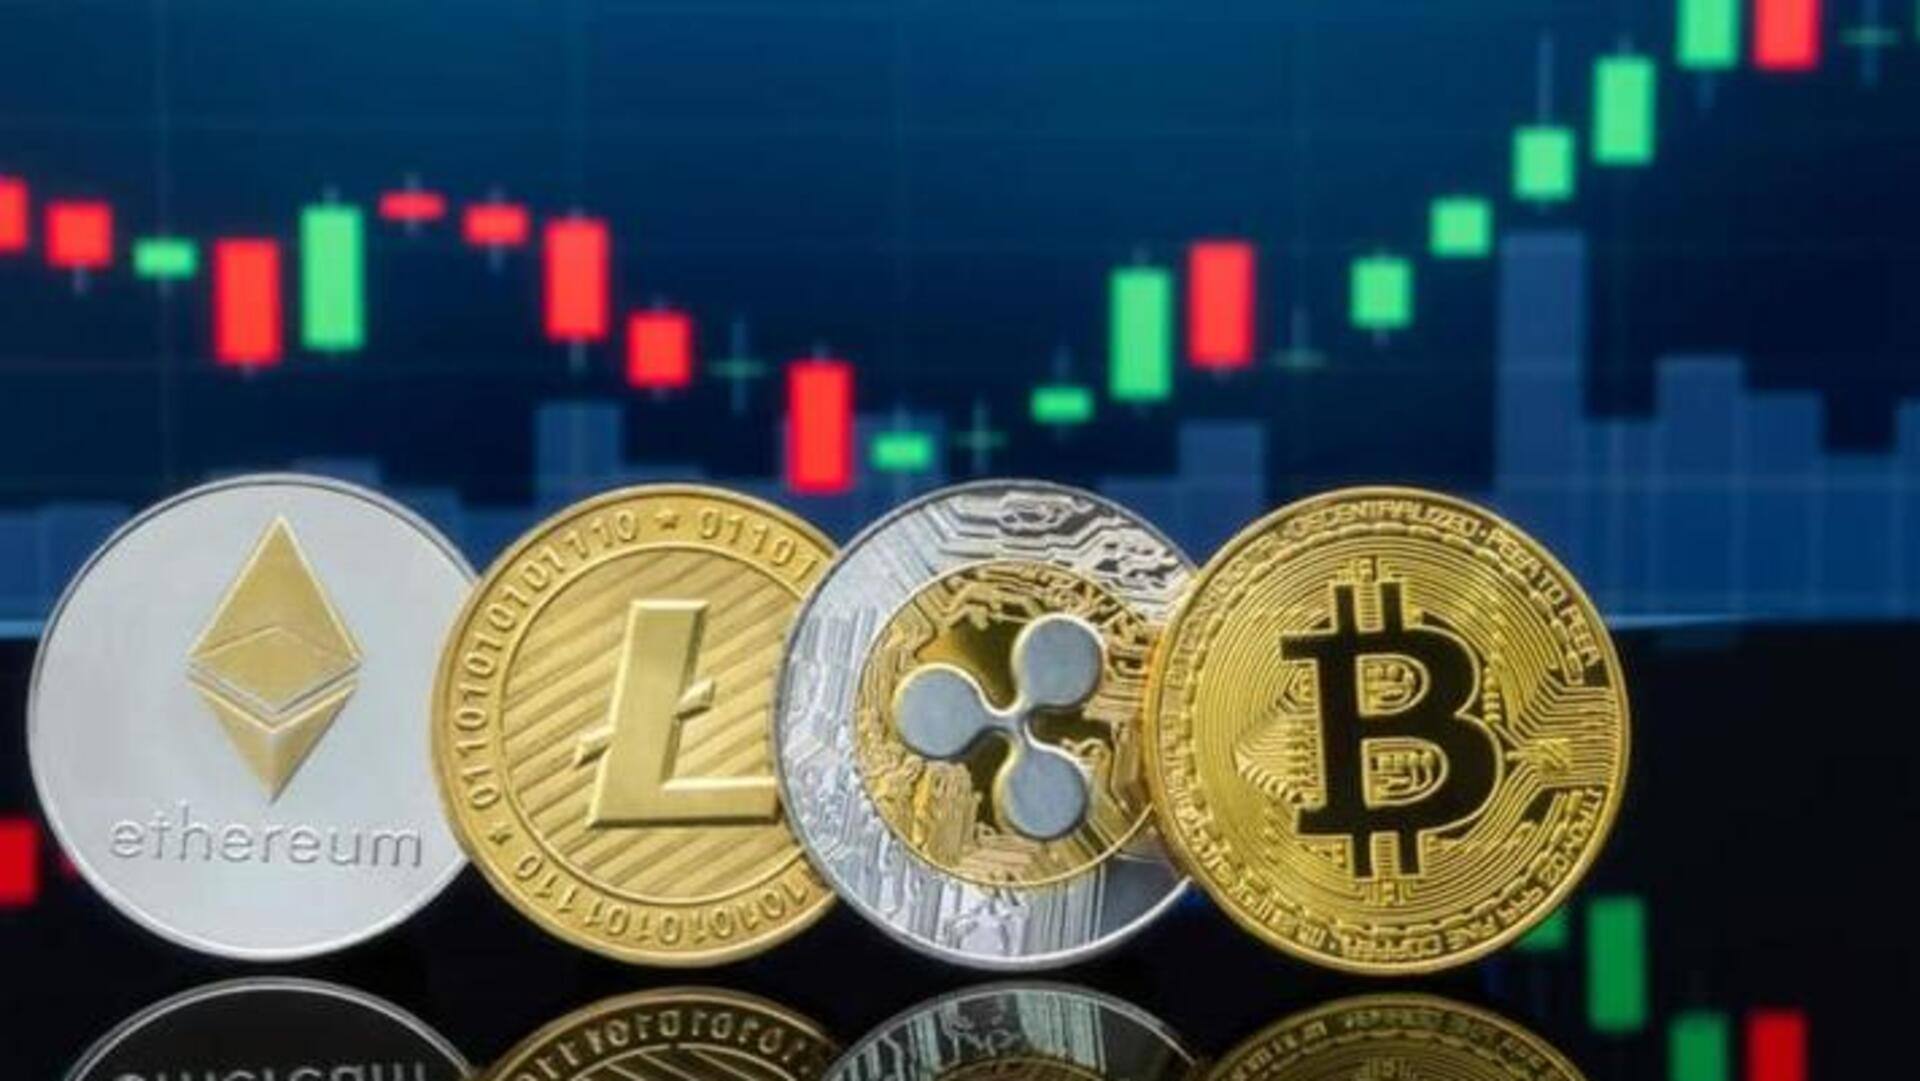 Today's cryptocurrency prices: Check Bitcoin, Ethereum, Dogecoin, BNB rates